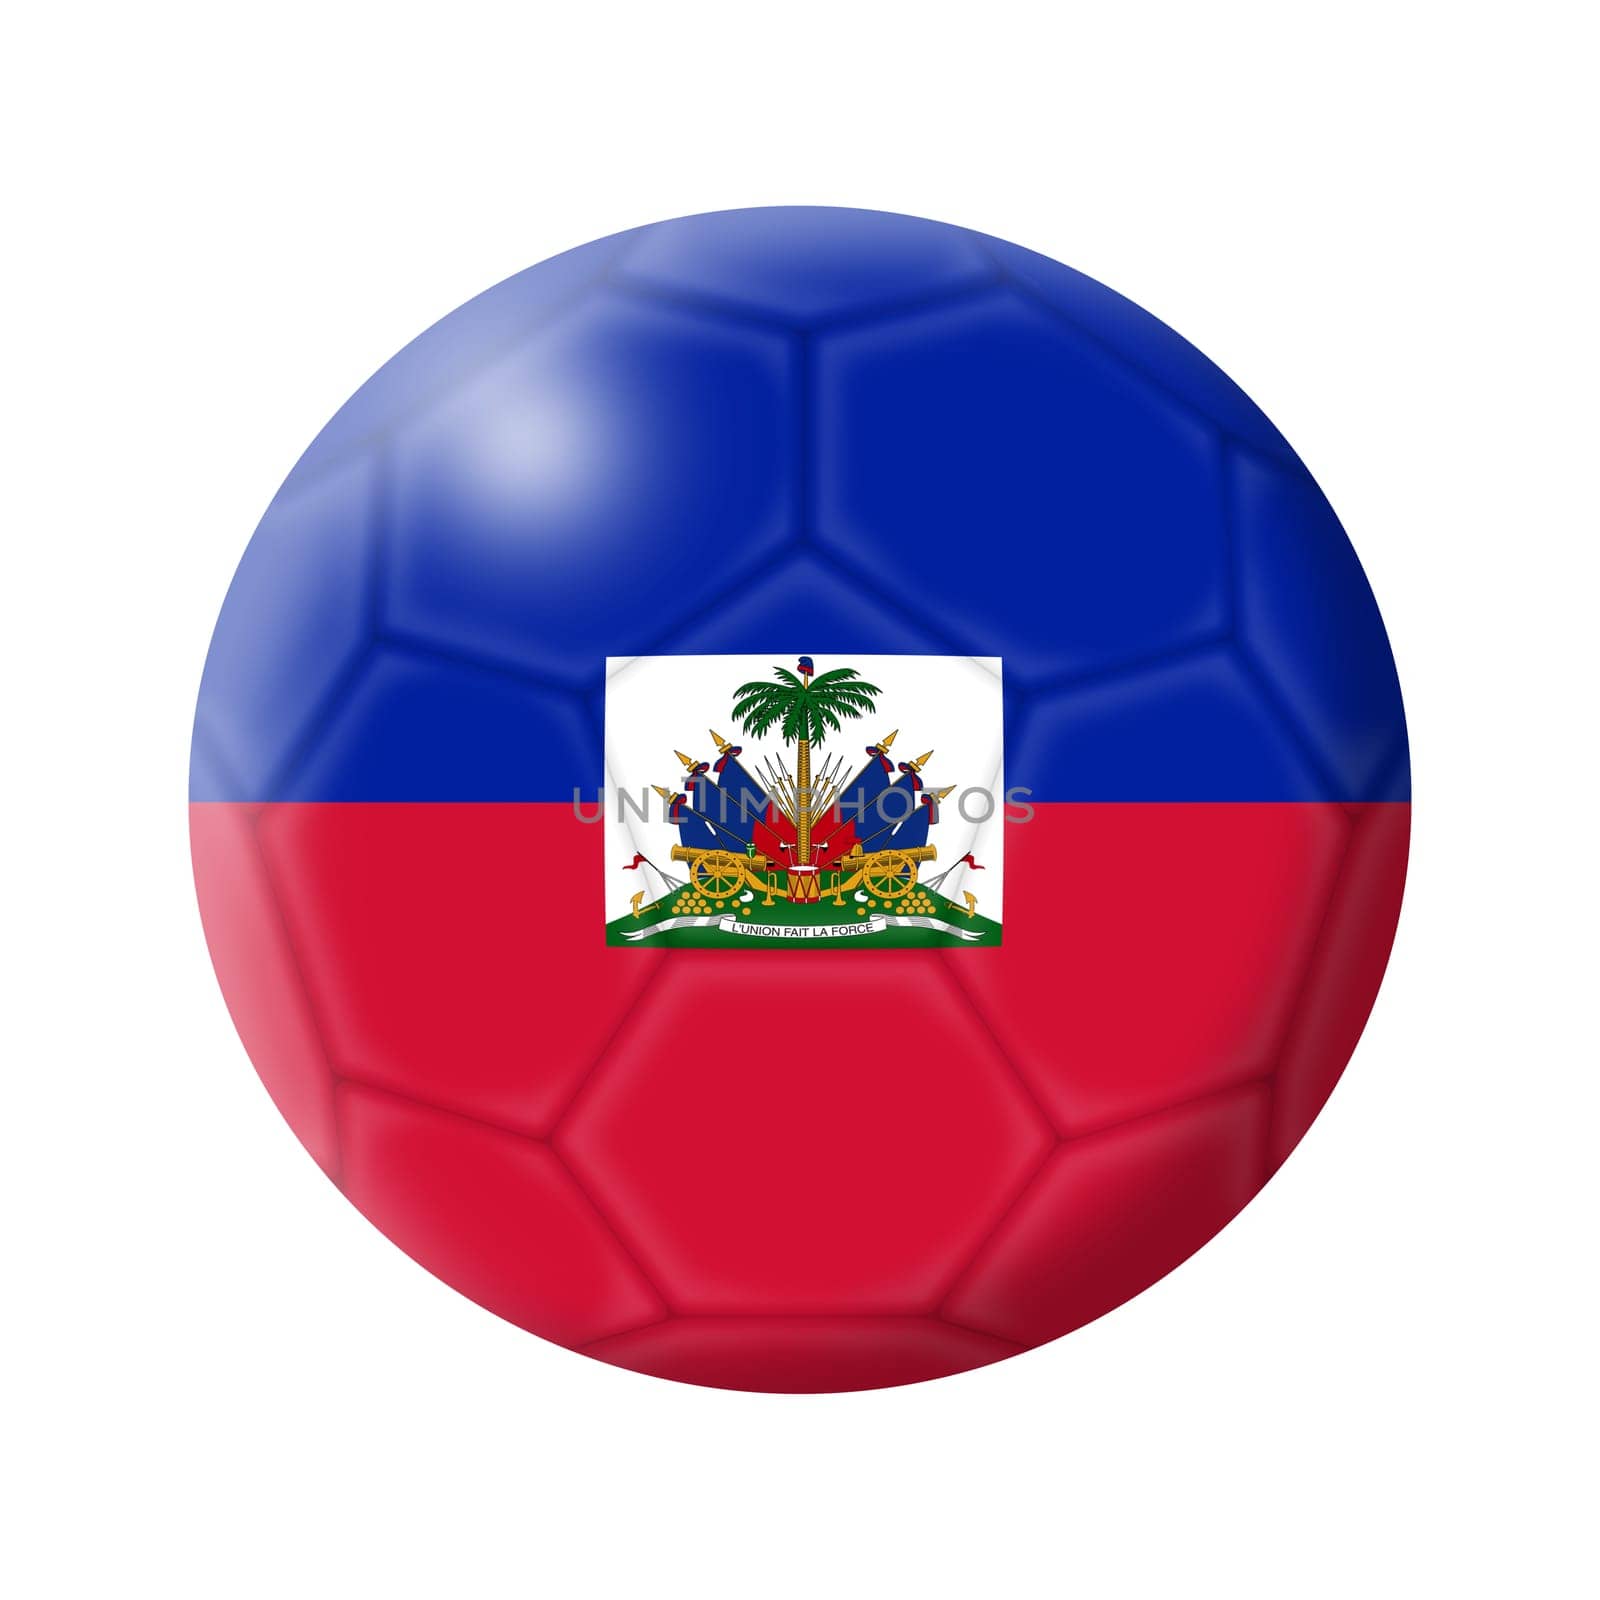 A Haiti soccer ball football 3d illustration isolated on white with clipping path